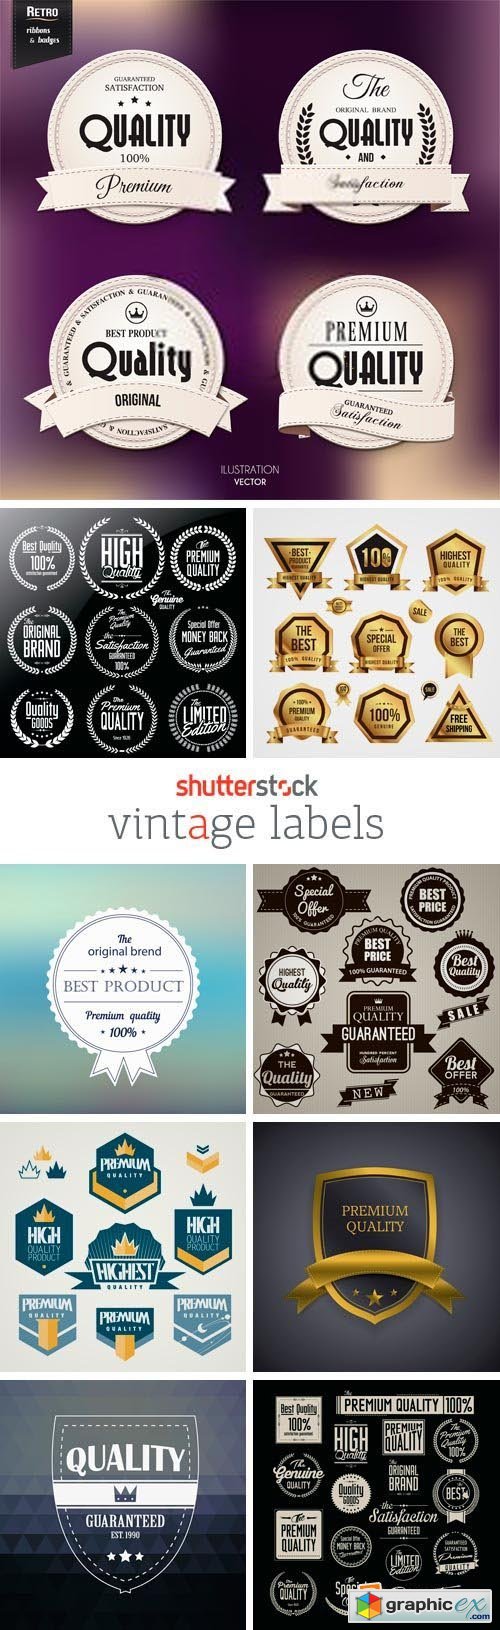 Amazing SS - Vintage Labels, 24xEPS